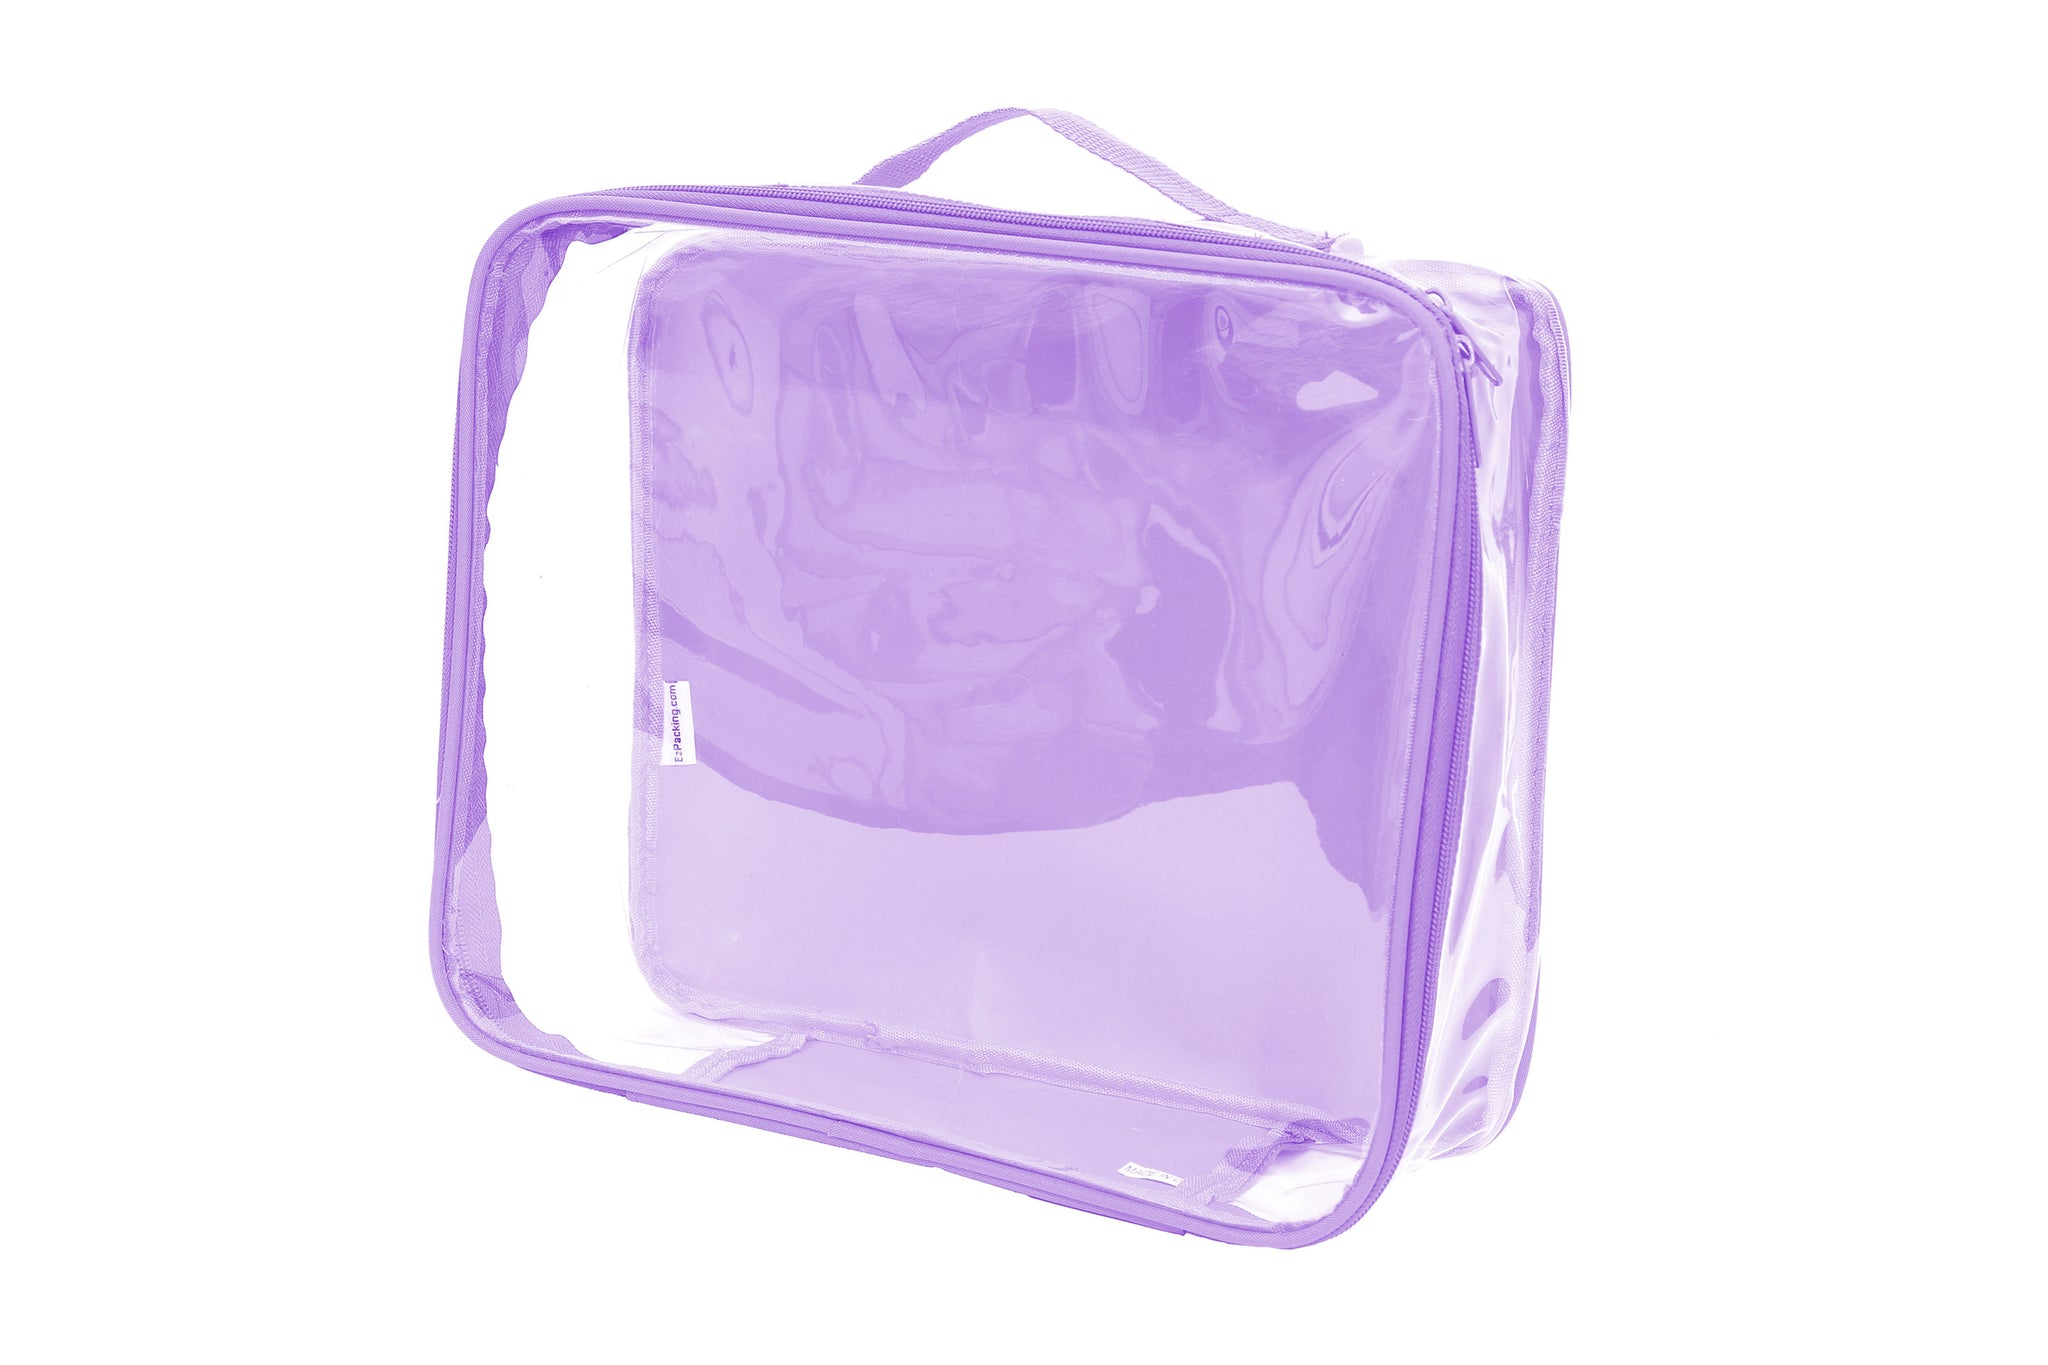 Medium Packing Cube for Travel - Clear Suitcase Organizer Pouch with ...